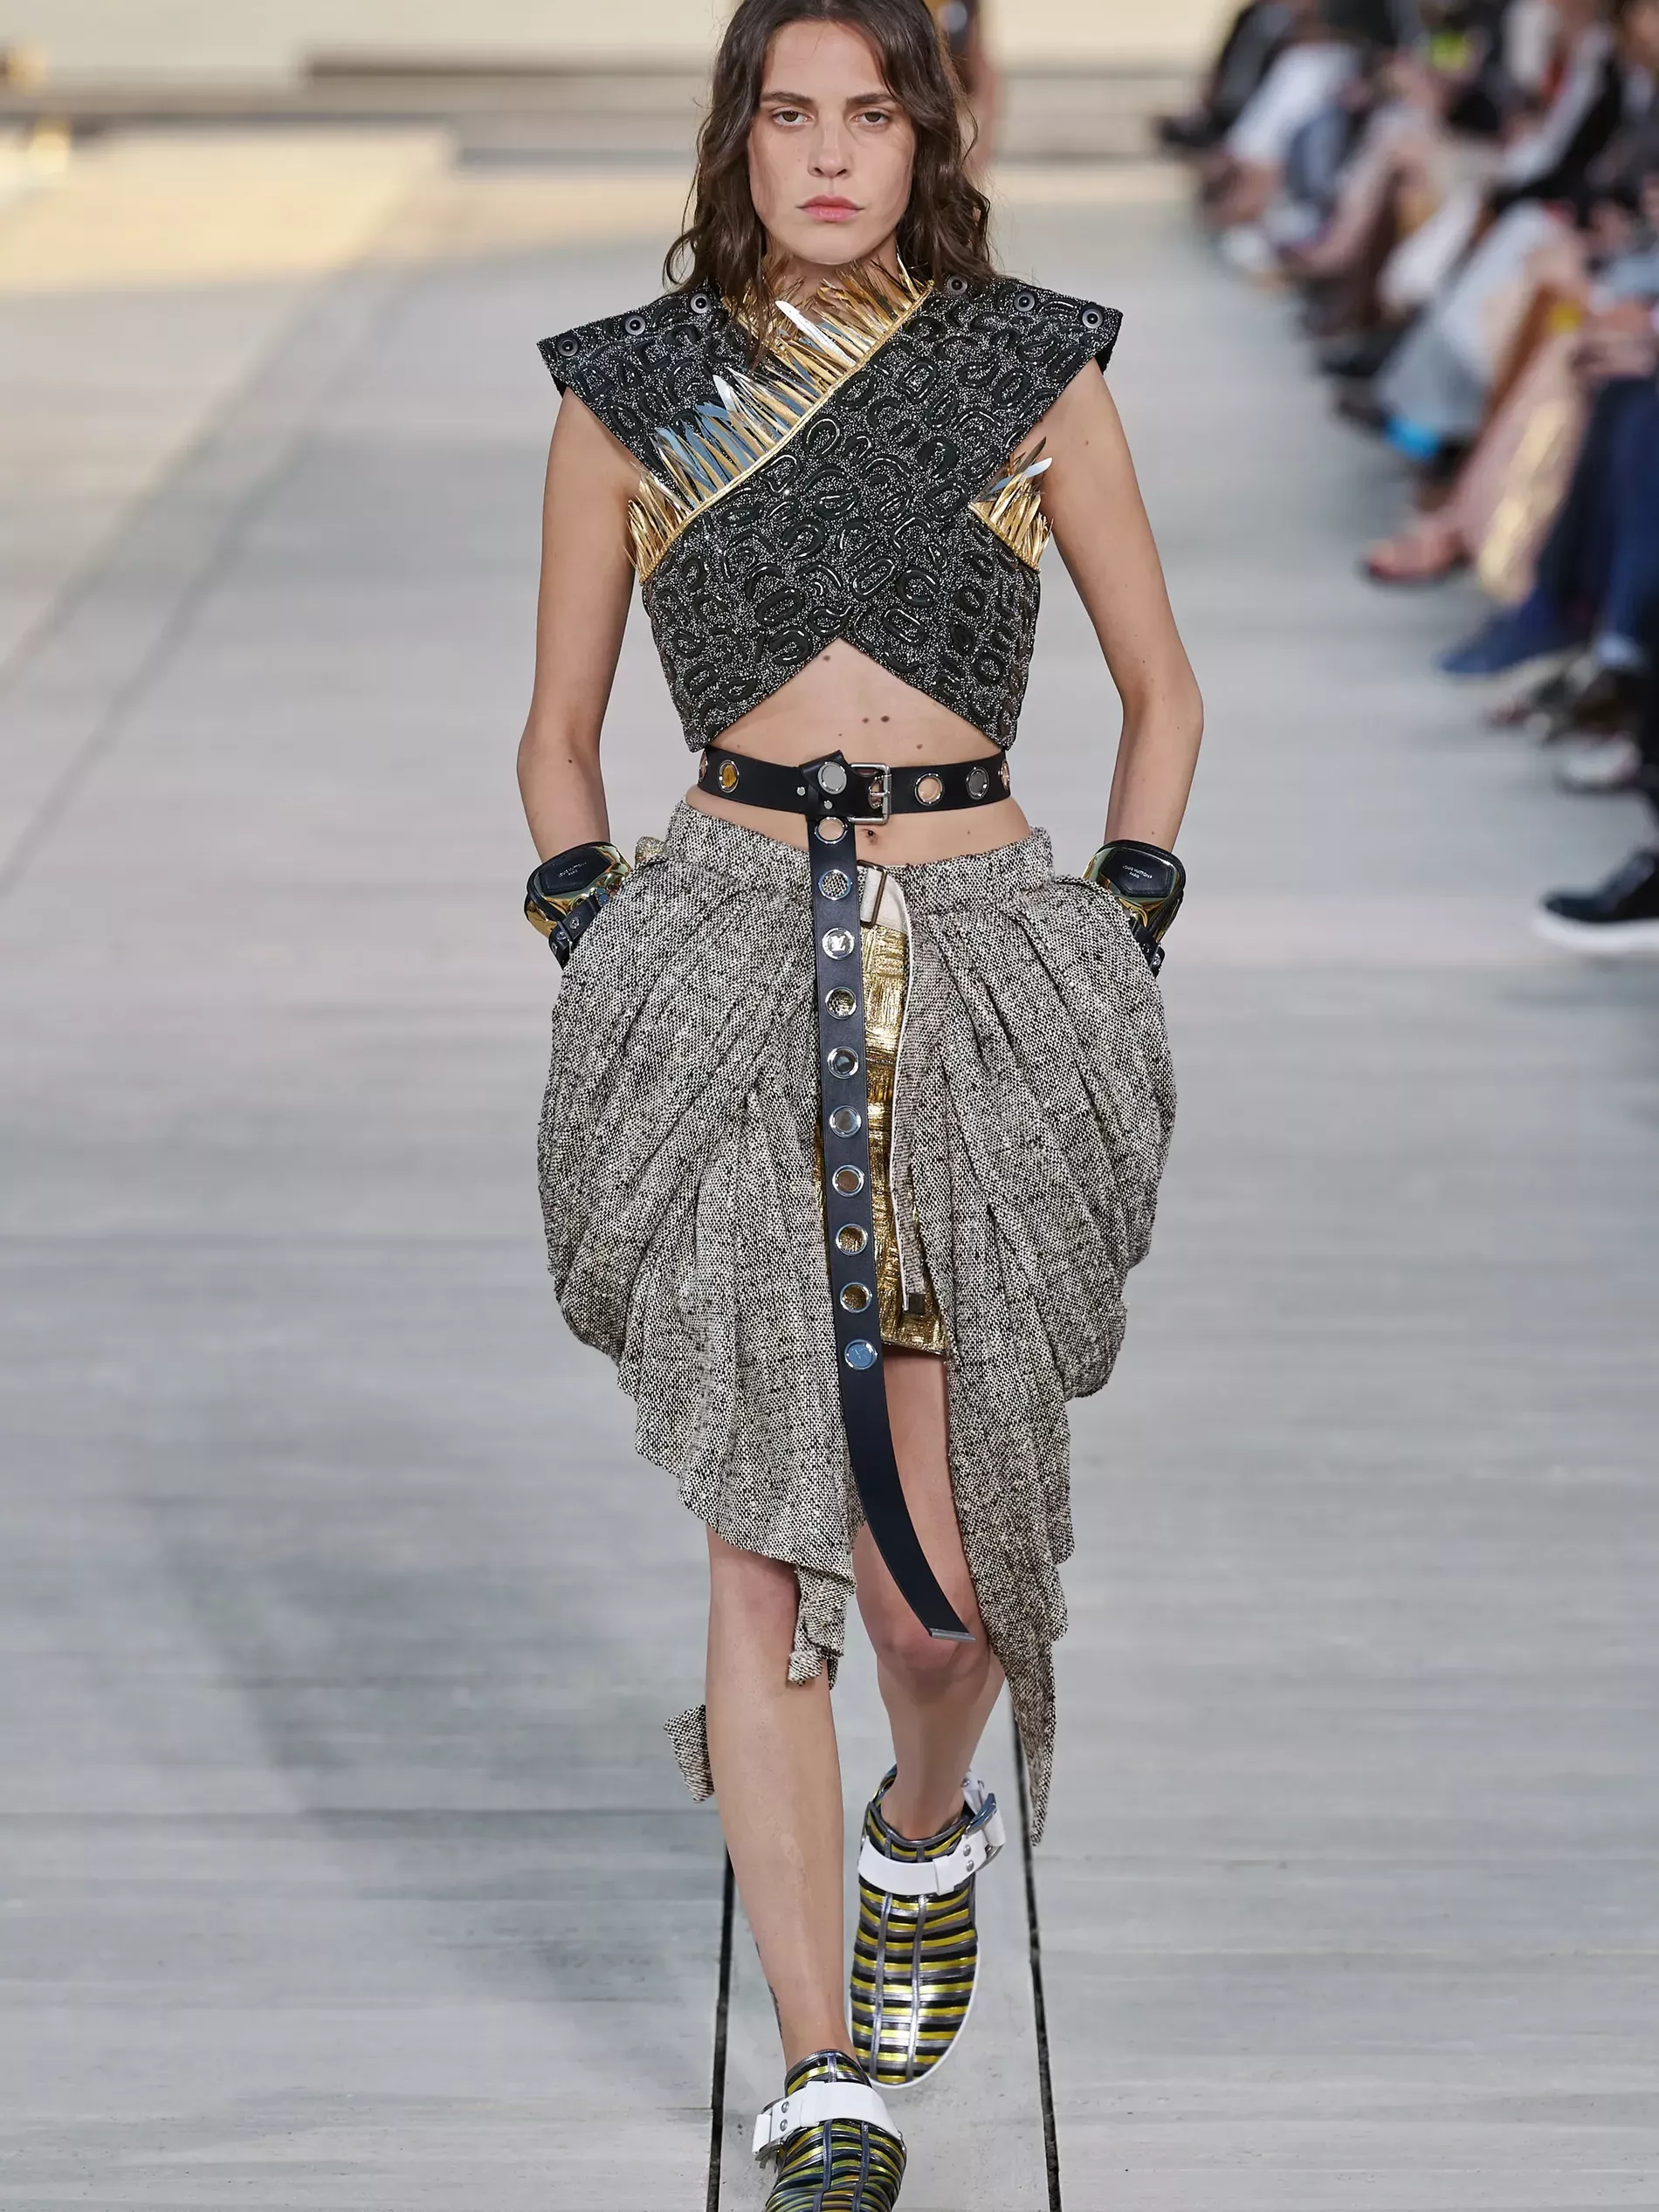 Louis Vuitton's Cruise 2022 Collection Has Space Age Airs – WWD